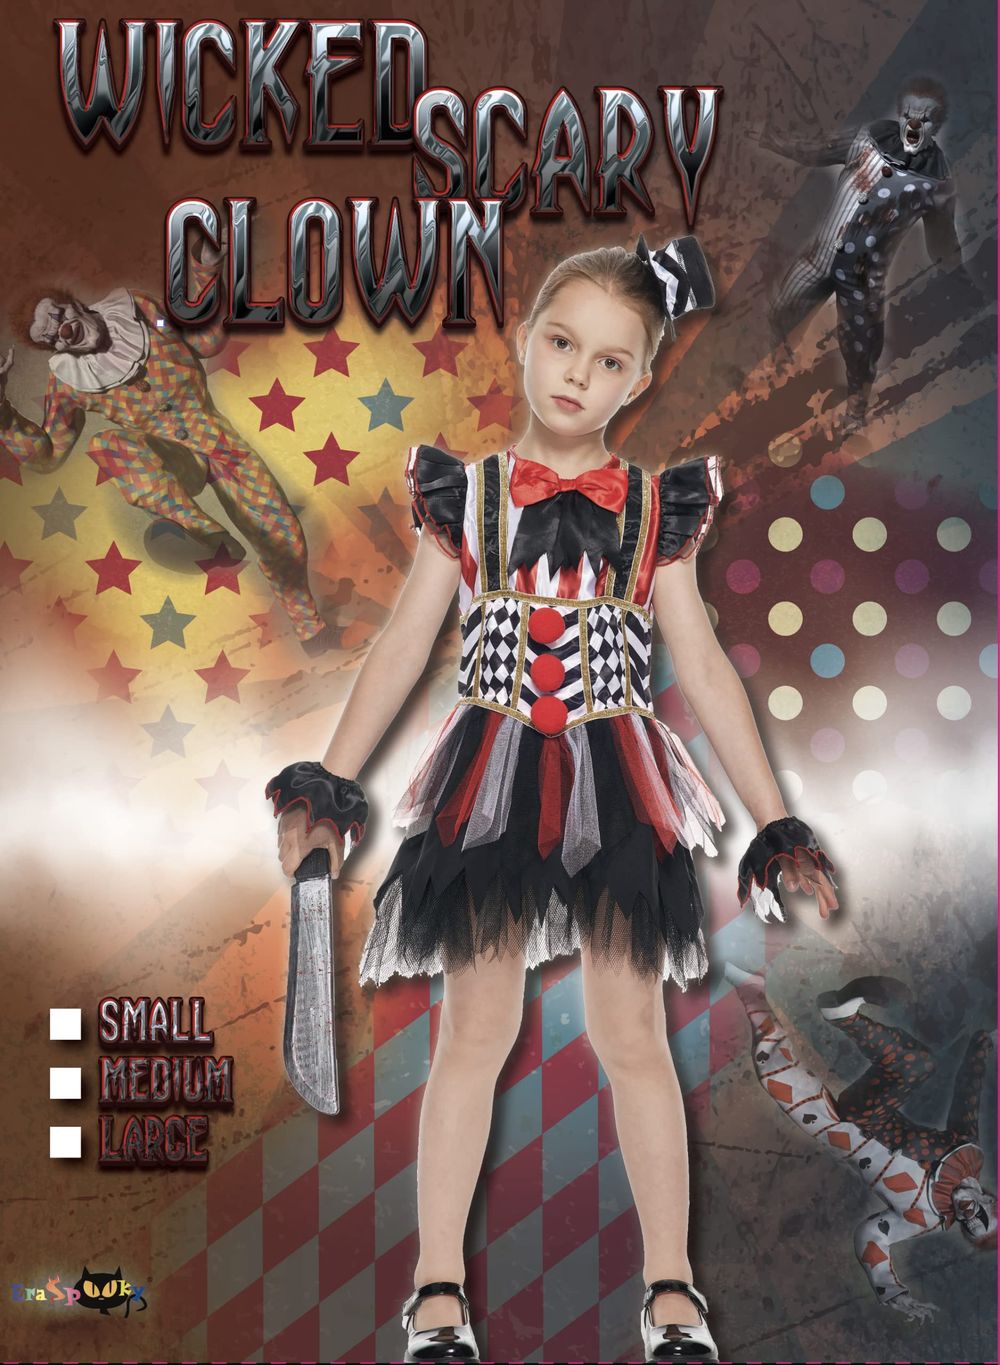 Eraspooky Halloween Kids Creepy Clown Costumes for Girls Scary Clown Dress Party Suit